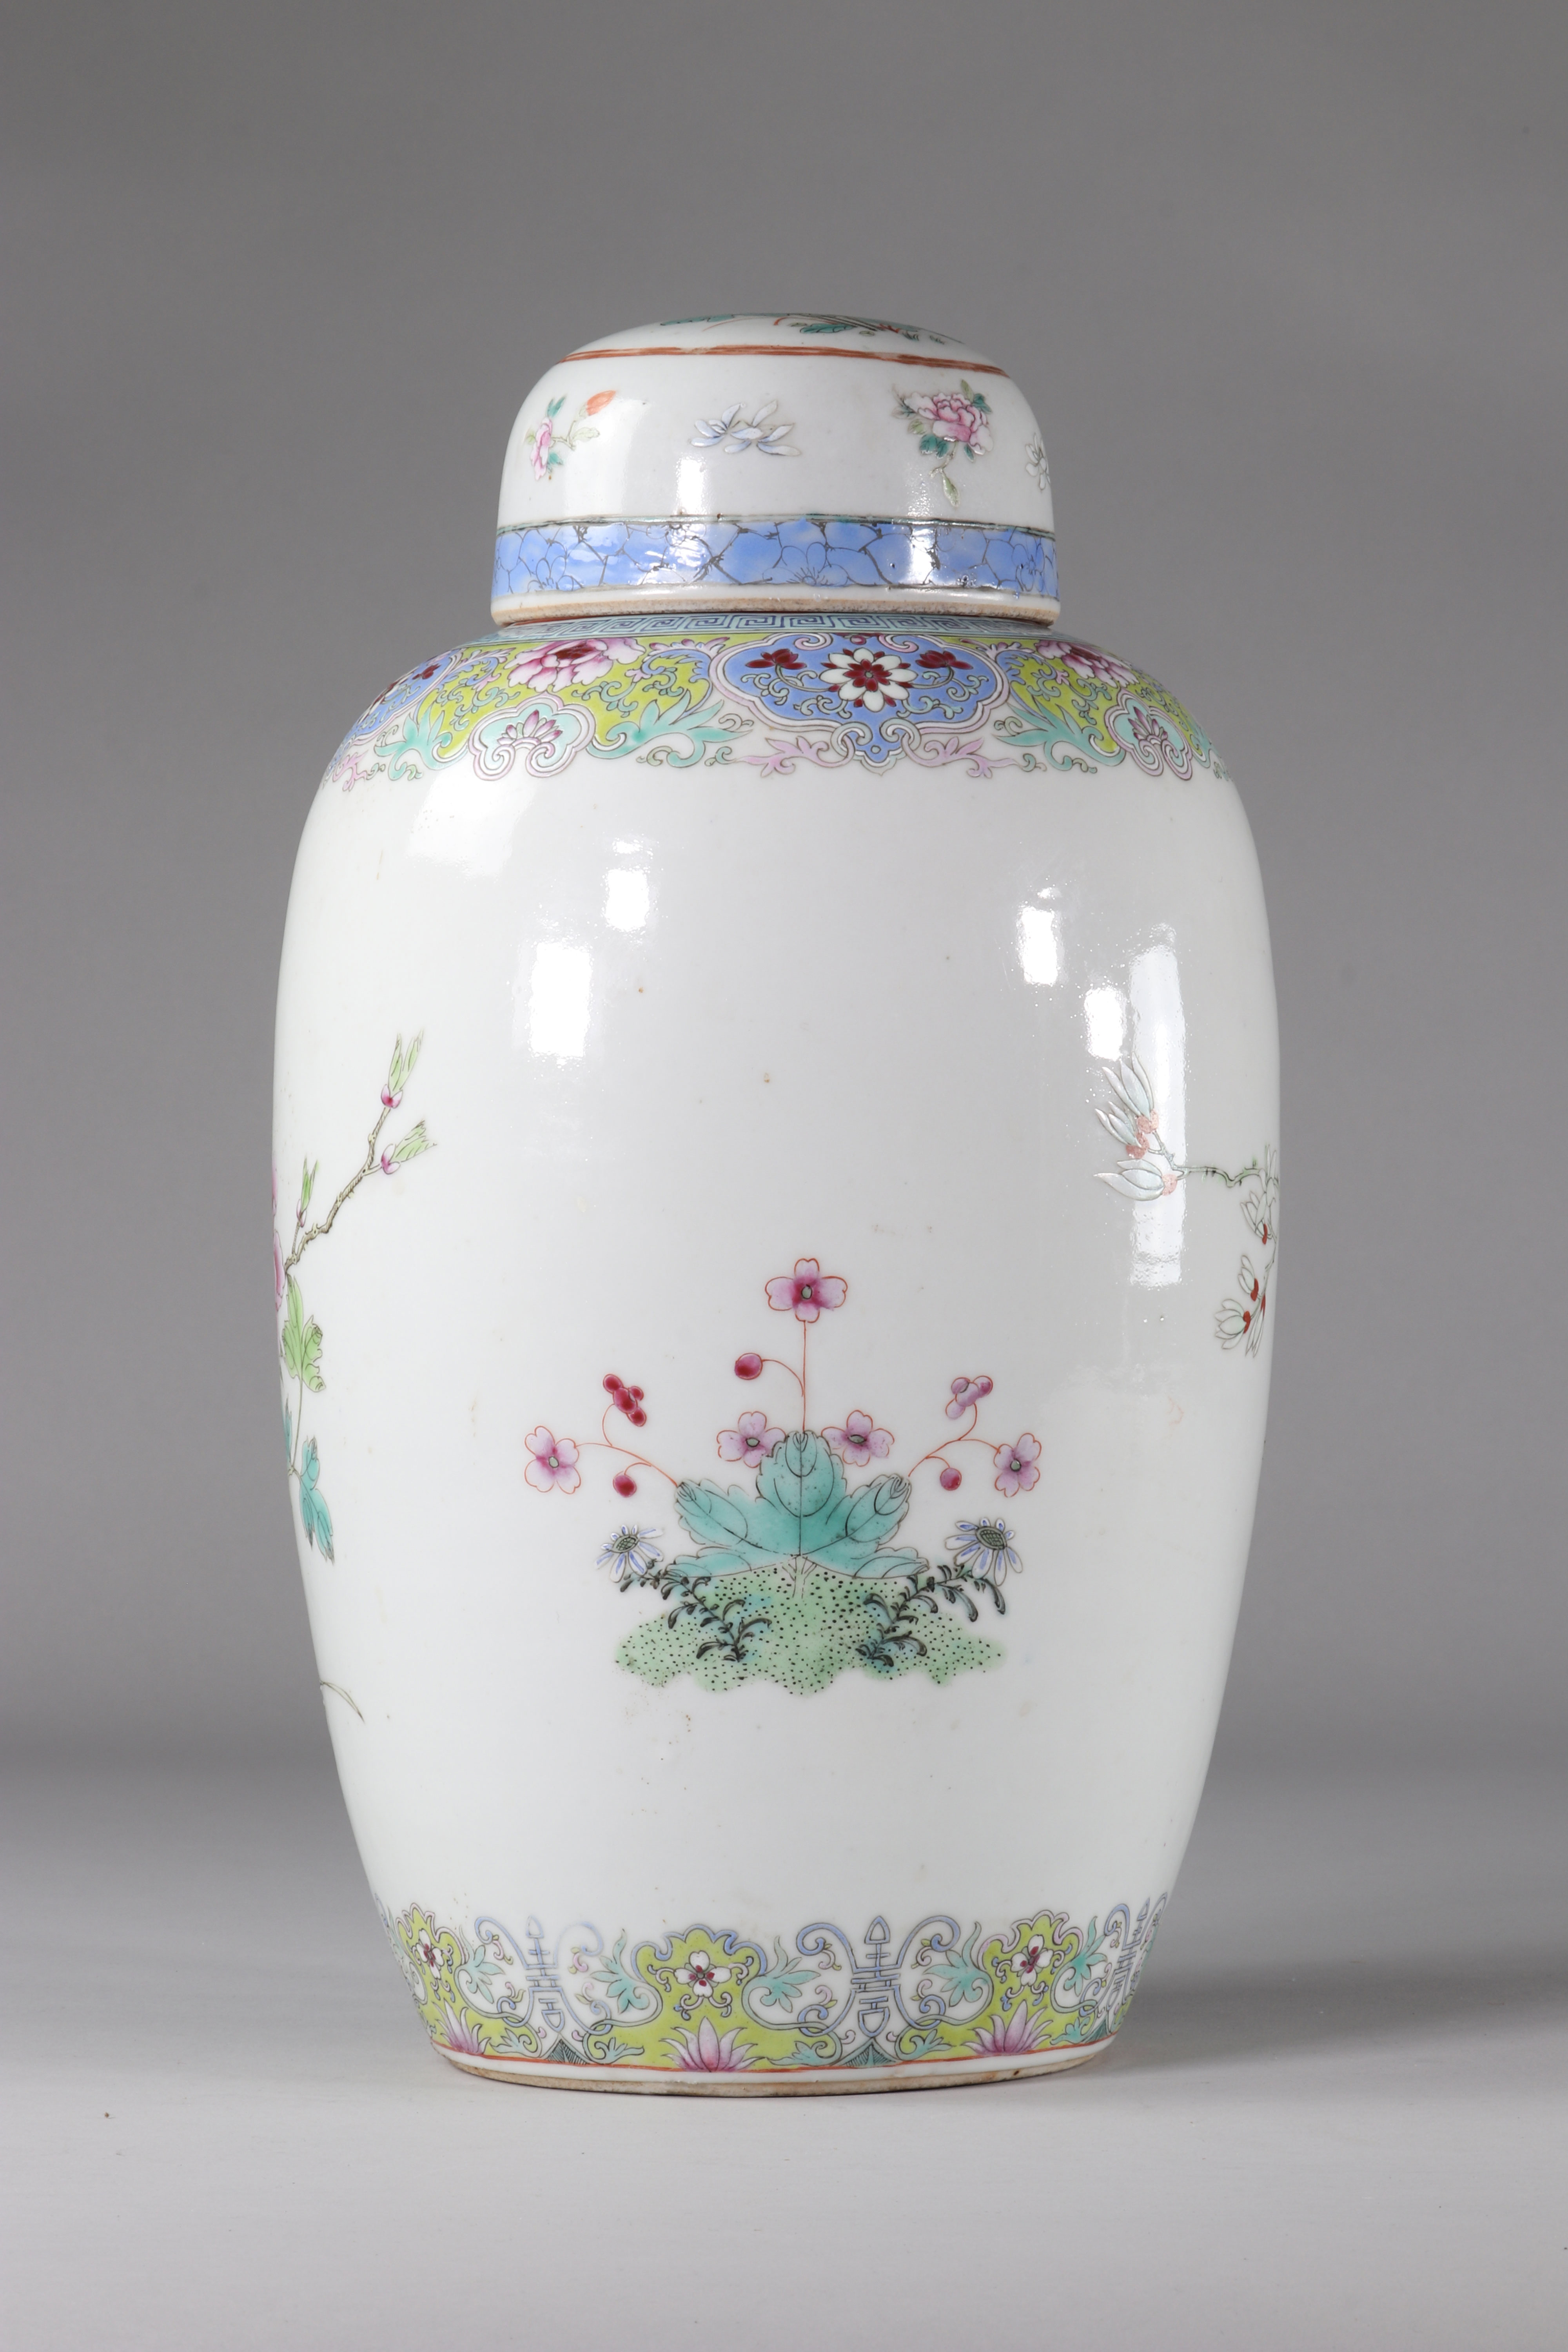 China famille rose porcelain vase decorated with birds and flowers Qing period - Image 4 of 7